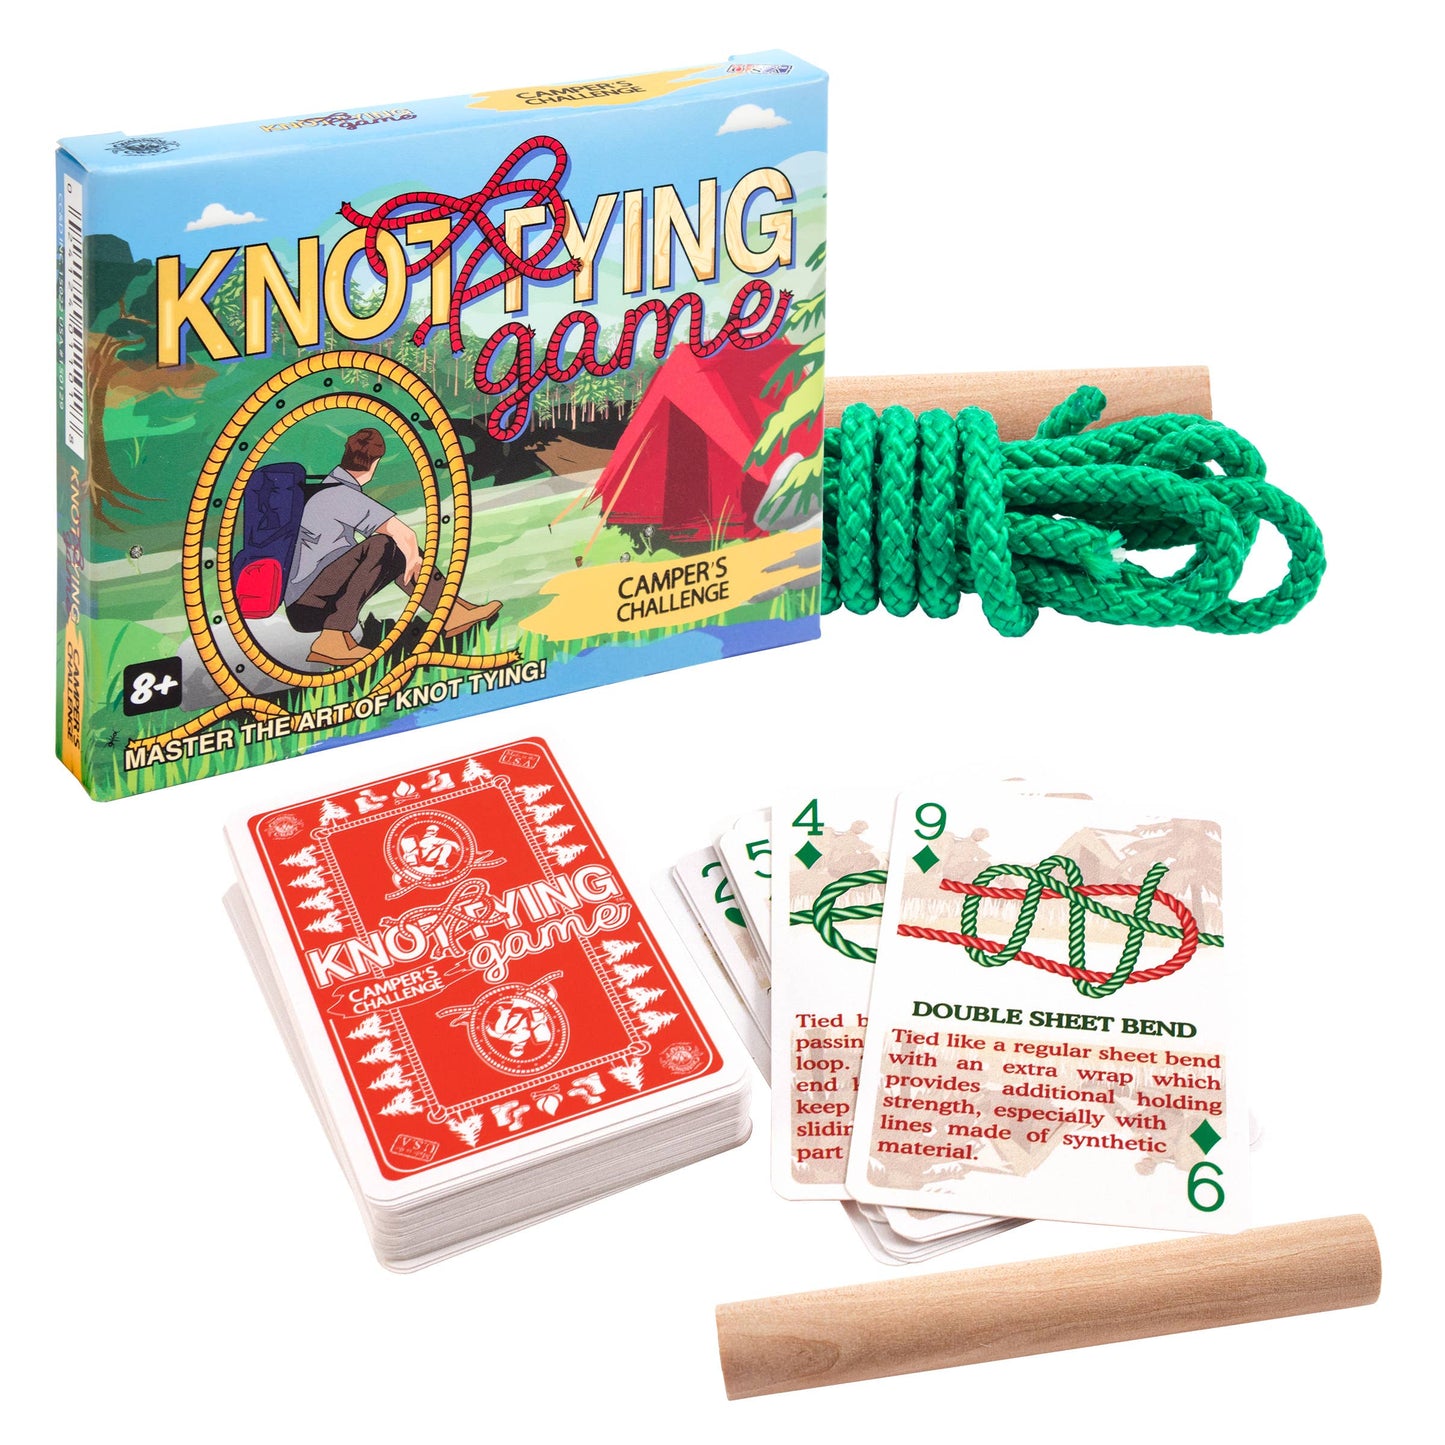 Channel Craft - Knot Tying Kit - Camper's Edition